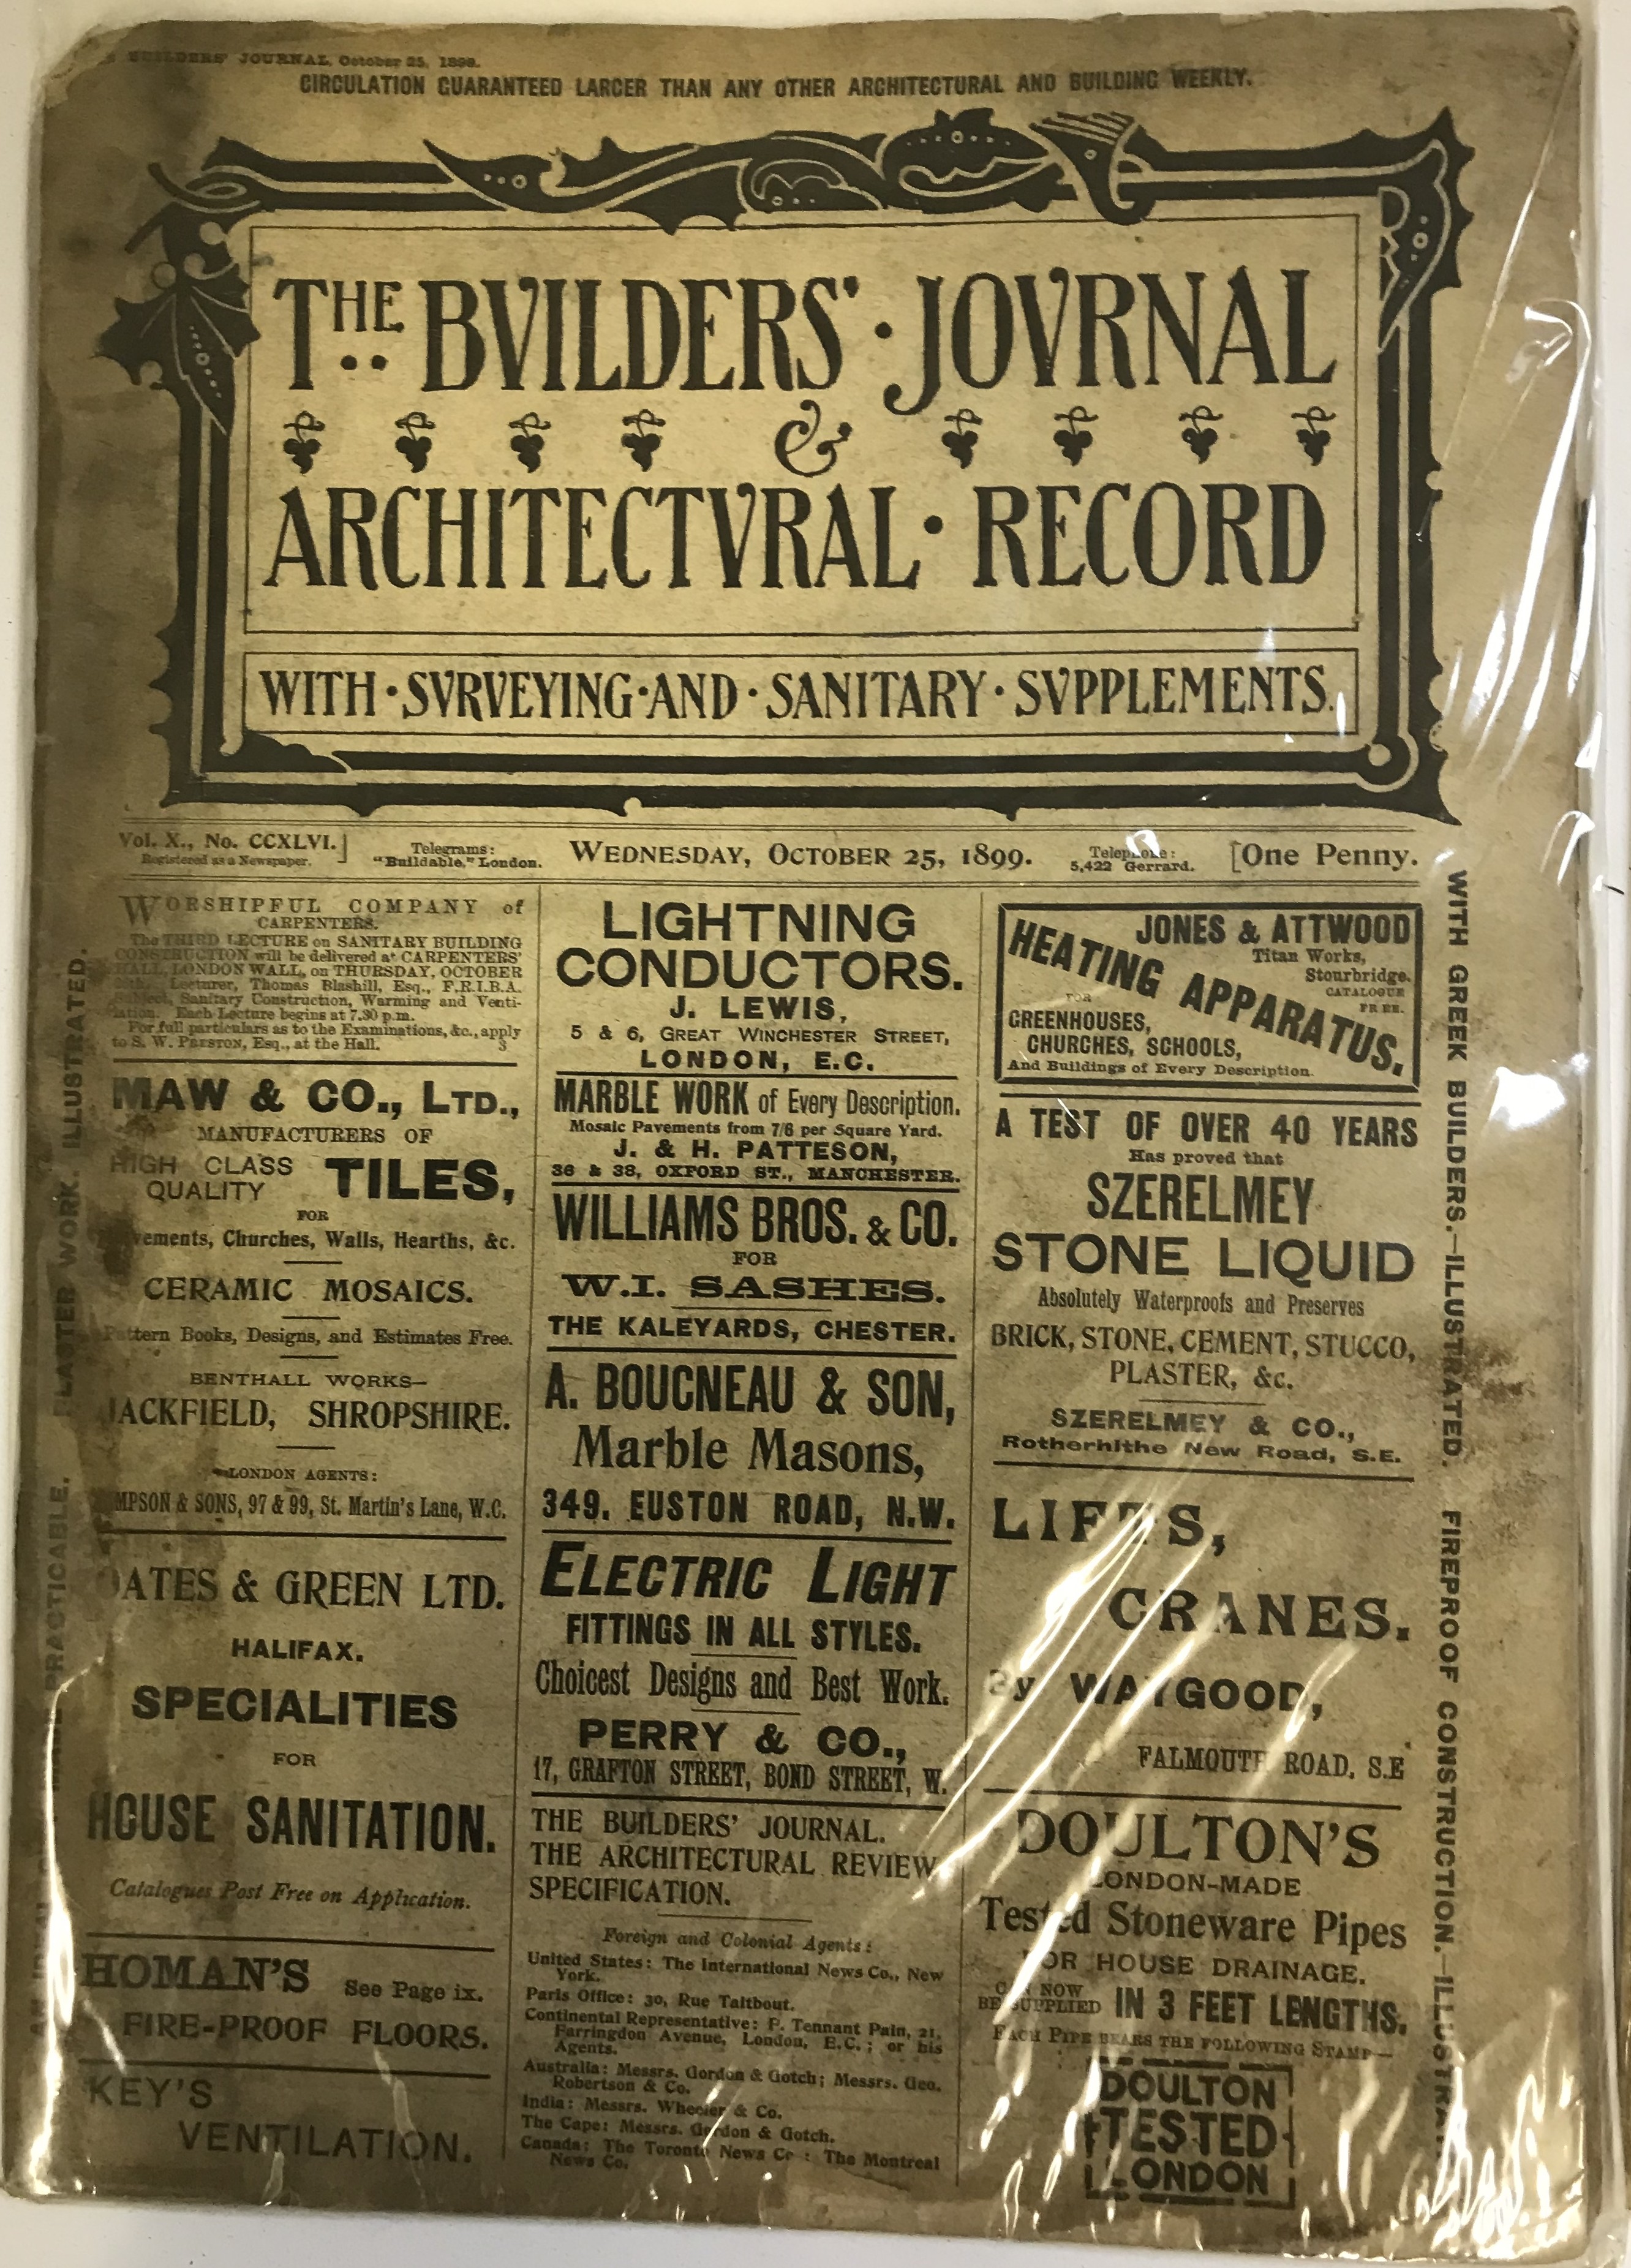 THE BUILDERS JOURNAL 1899 -1902 - Image 2 of 18